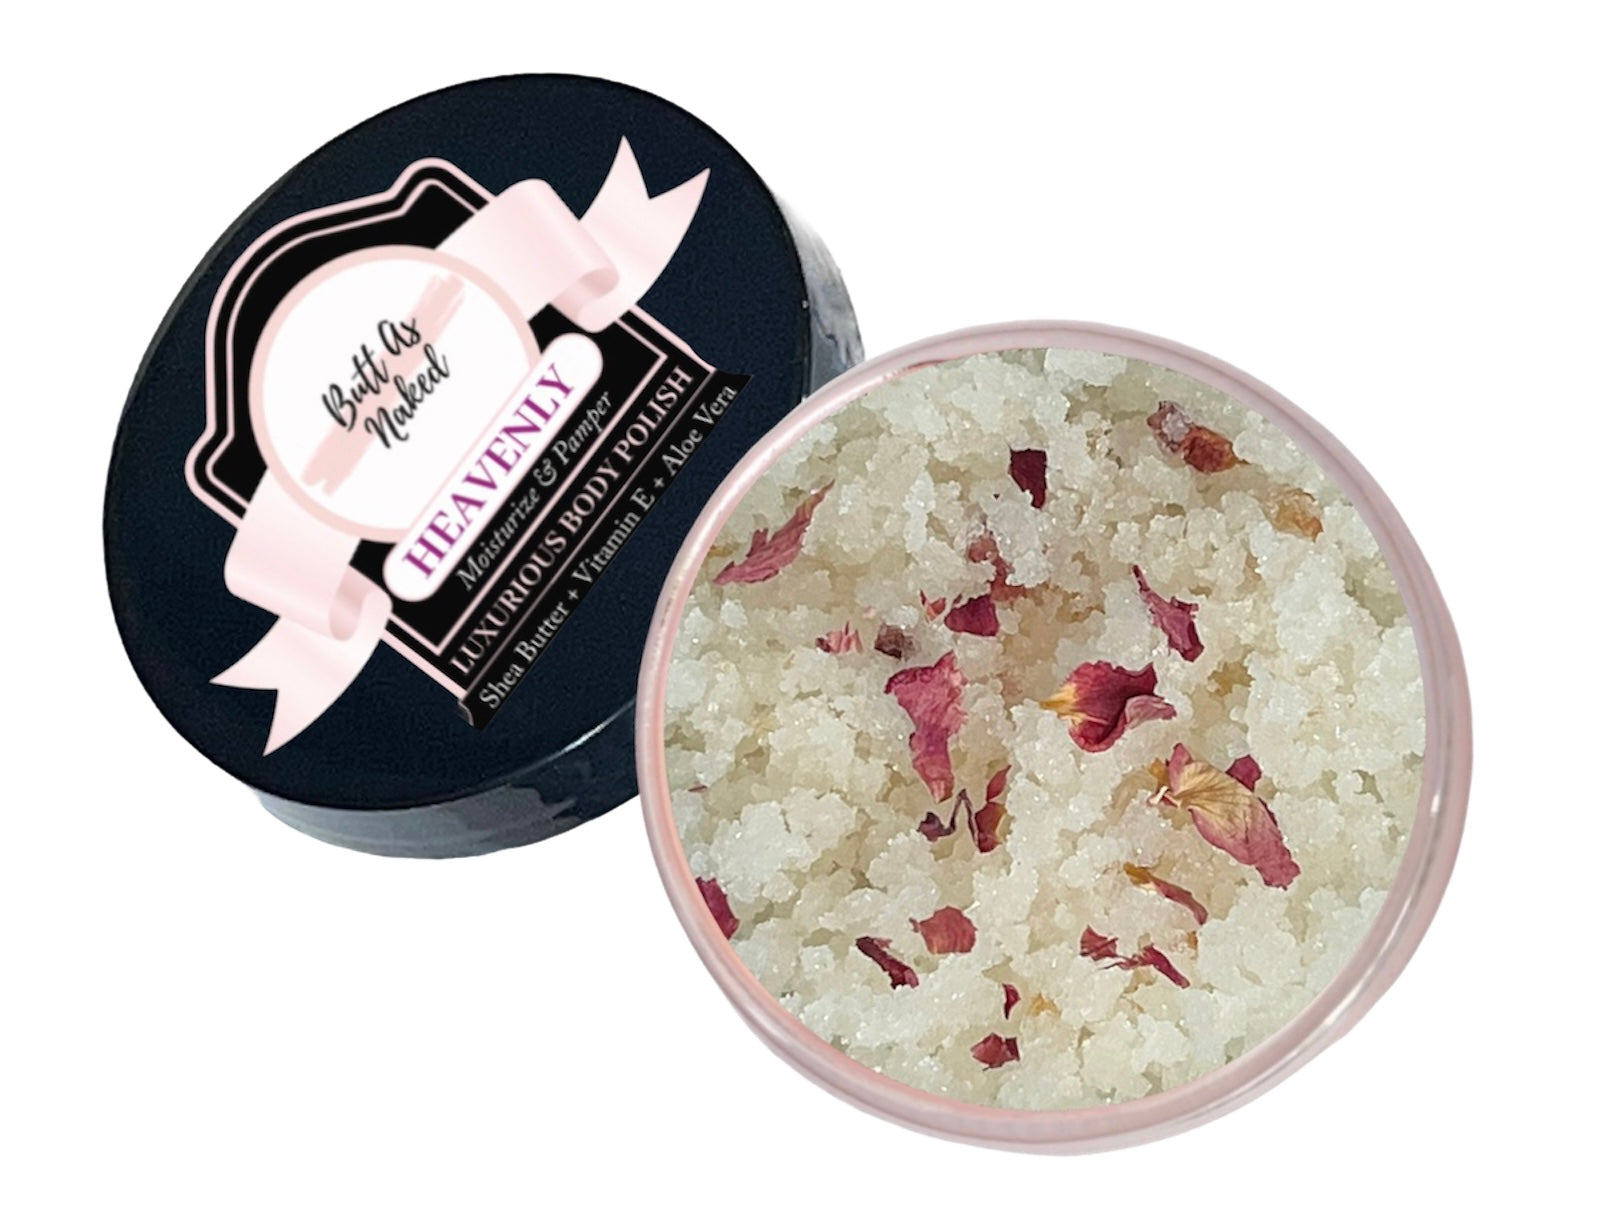 Heavenly (Rose Infused) Body Polish